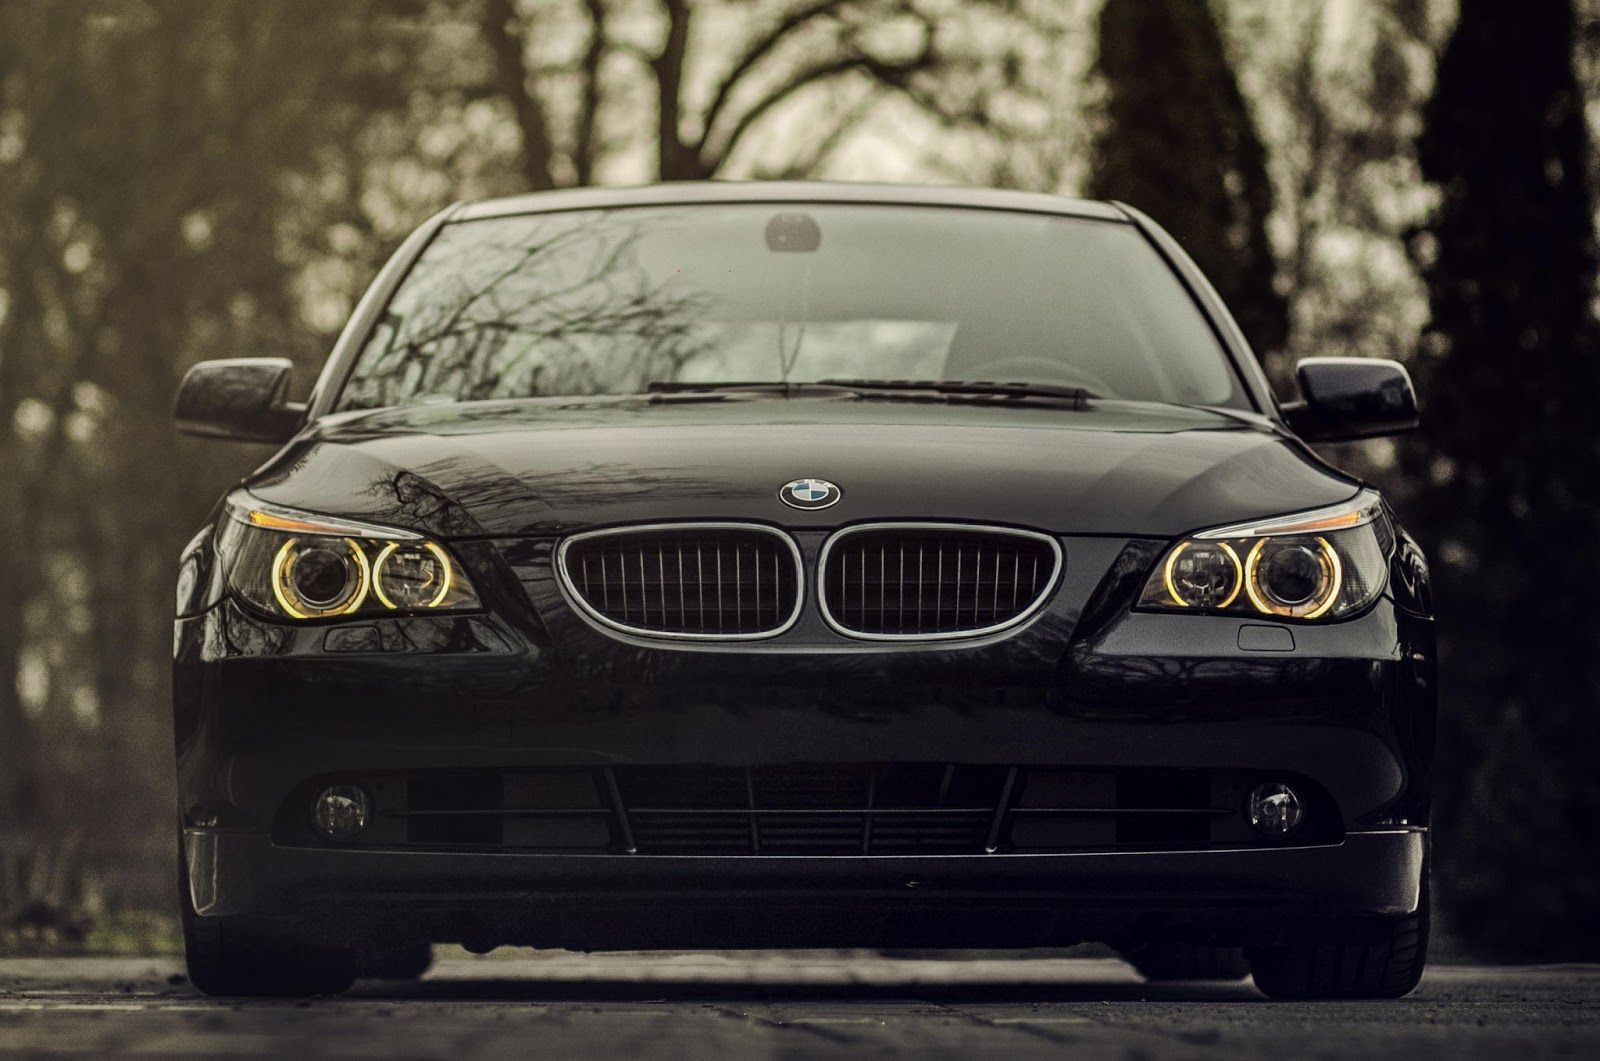 Bmw 520d Black Front View Front Bumper HD 1080p Cars Wallpaper, Desktop Background HD, Picture and Image. Bmw wallpaper, Bmw, Car wallpaper